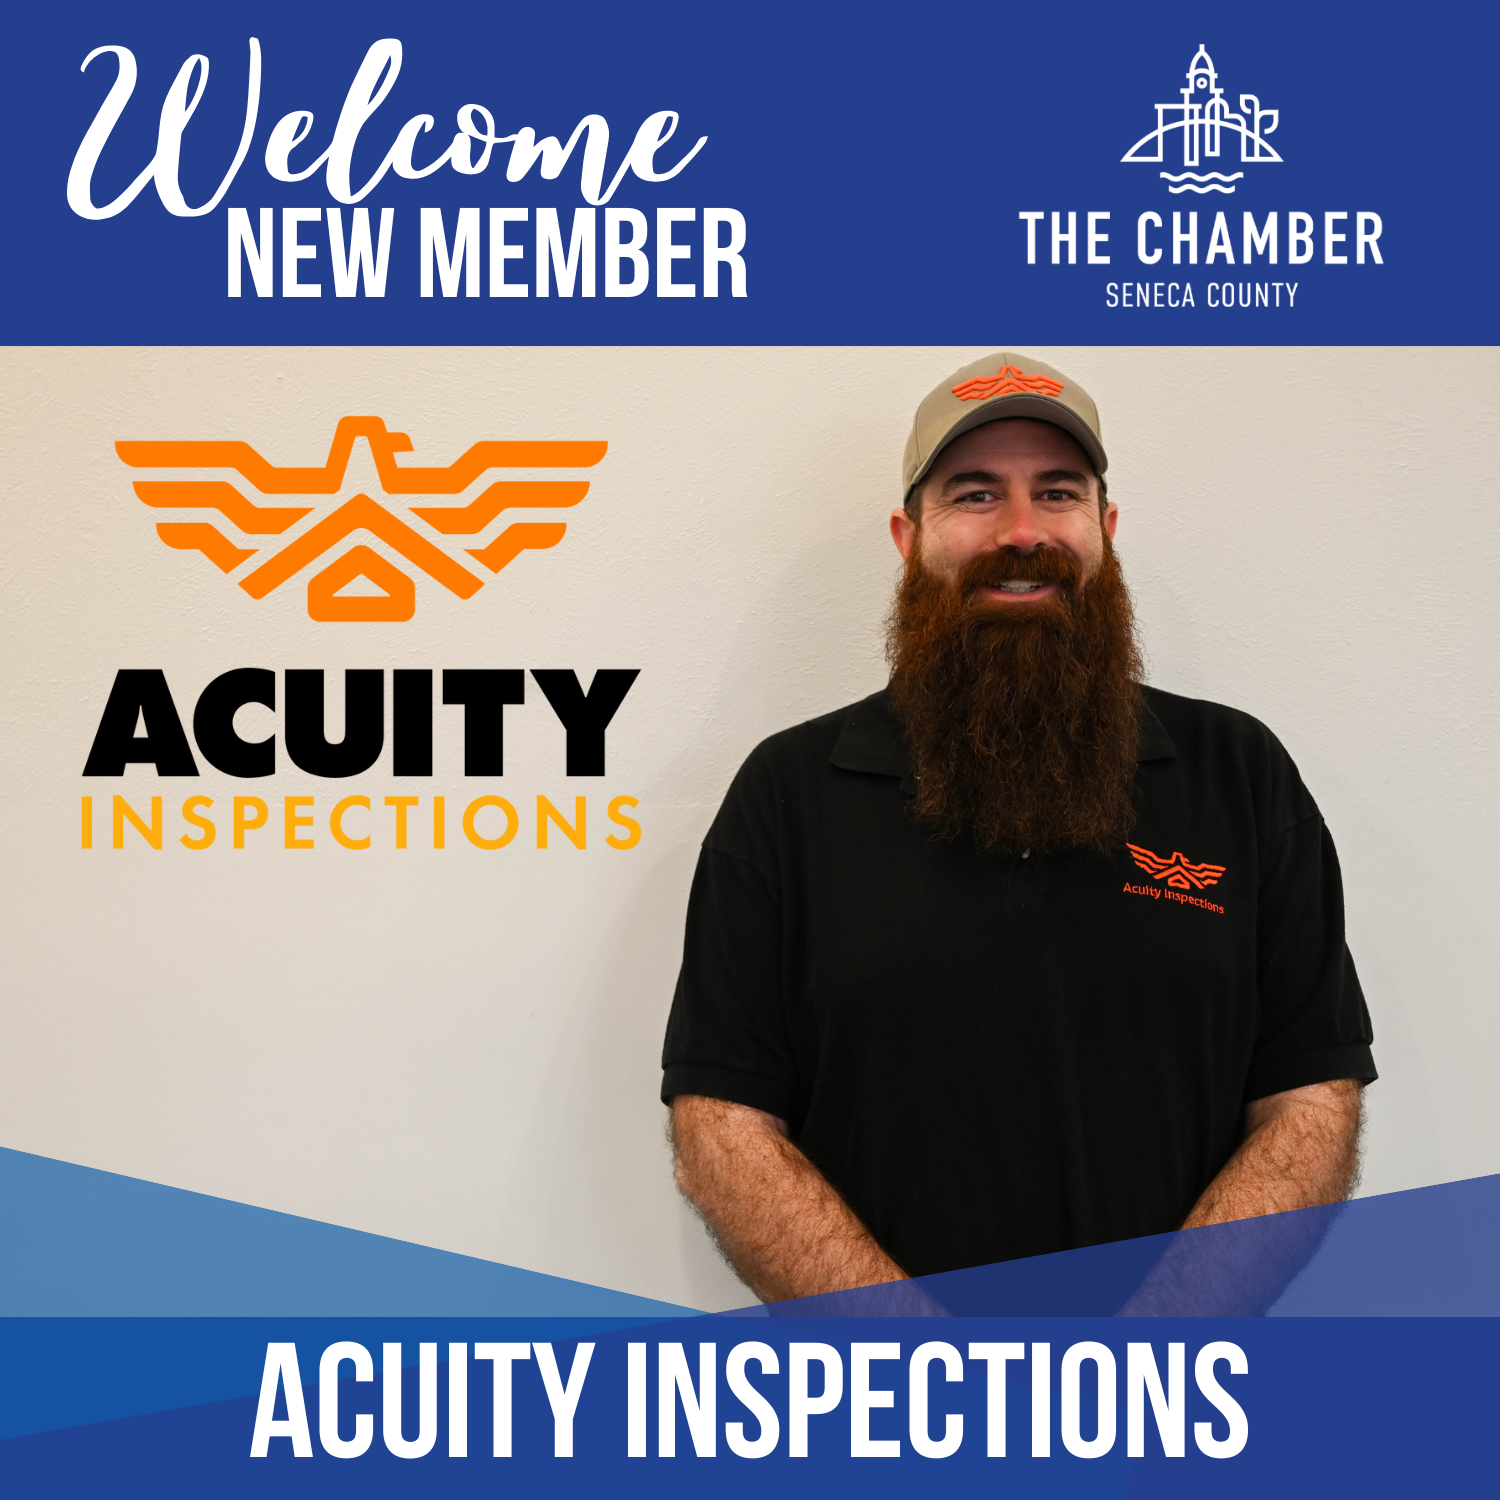 New Member: Acuity Inspections